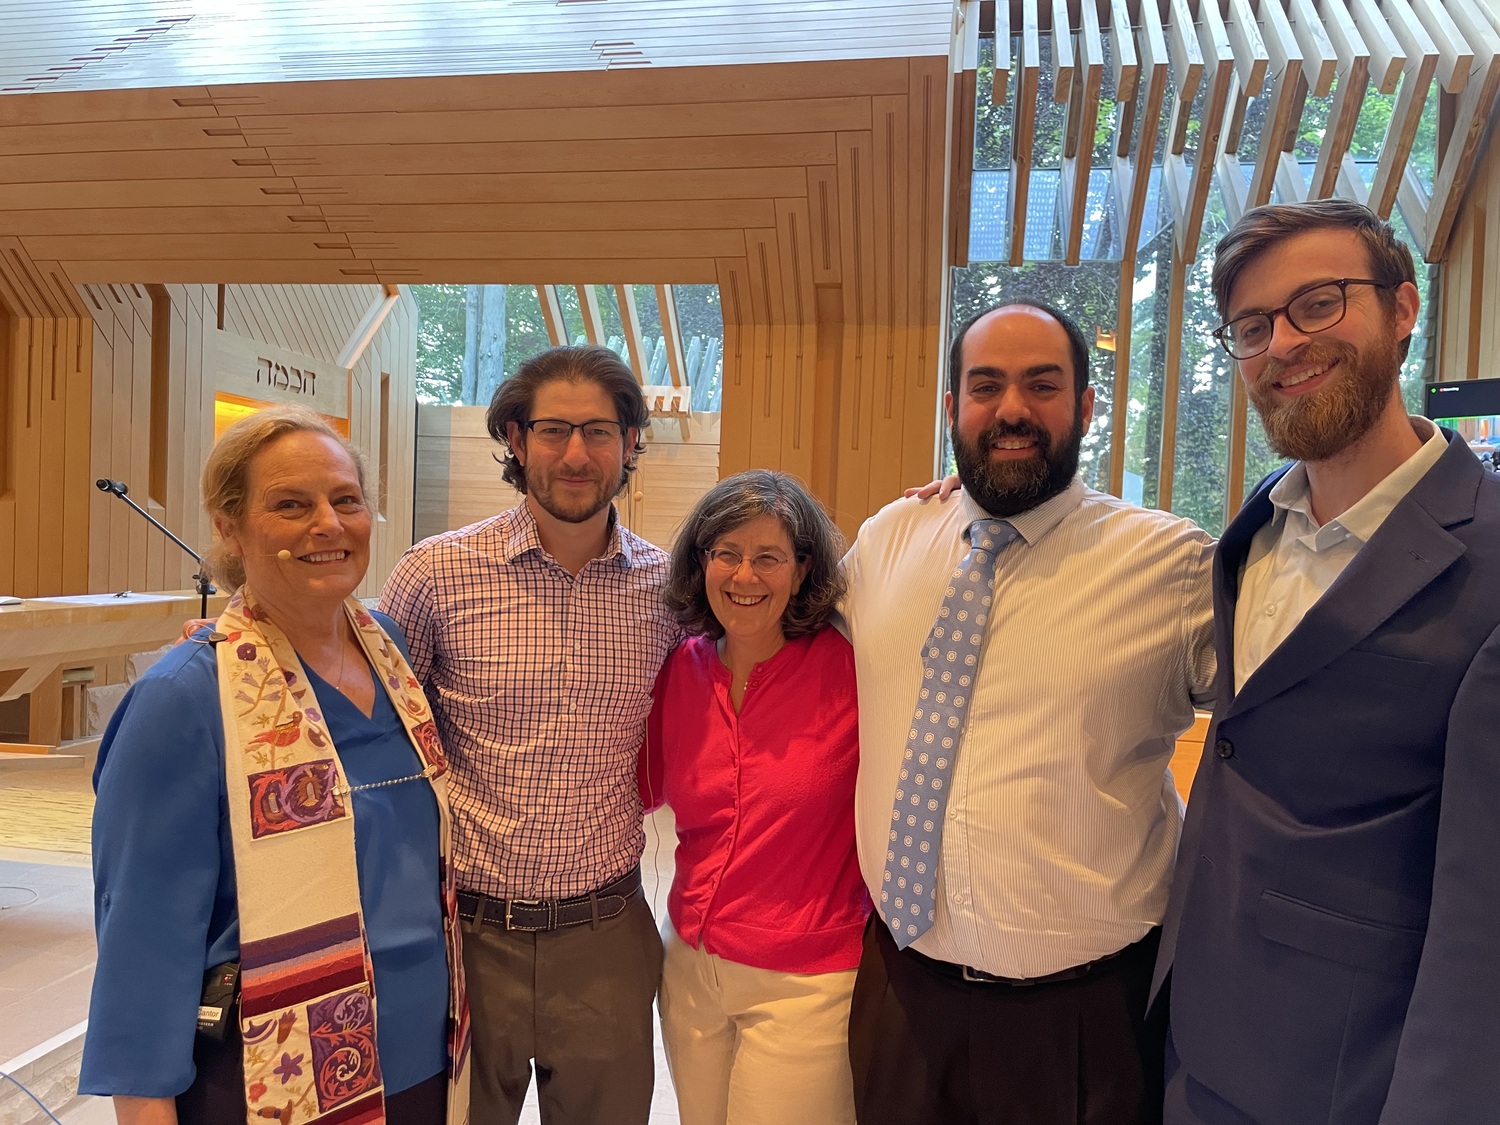 The Jewish Center of the Hamptons, Temple Adas Israel and the Conservative Synagogue of the Hamptons joined together on May 25 for an evening of learning with the rabbis. In celebration of the Jewish holiday Shavuot, the joint program unites the three communities around a sacred ritual called Tikkun Leil Shavuot. Tikkun means “correction,” while “Leil Shavuot” means “night of Shavuot.” Shavuot celebrates the giving of the Torah by God to the Jewish people, but, according to the legend, the Israelites overslept on the morning they were due to receive the Torah. As a correction for having overslept, the custom emerged of all-night learning. Rather than sleeping late, Jews would not sleep at all. From left, Cantor Debra Stein and Rabbi Josh Franklin of the Jewish Center of the Hamptons, Rabbi Jan Uhrbach of The Conservative Synagogue of the Hamptons, and Rabbi Dan Geffen and Student Cantor Kevin McKenzie of Temple Adas Israel.